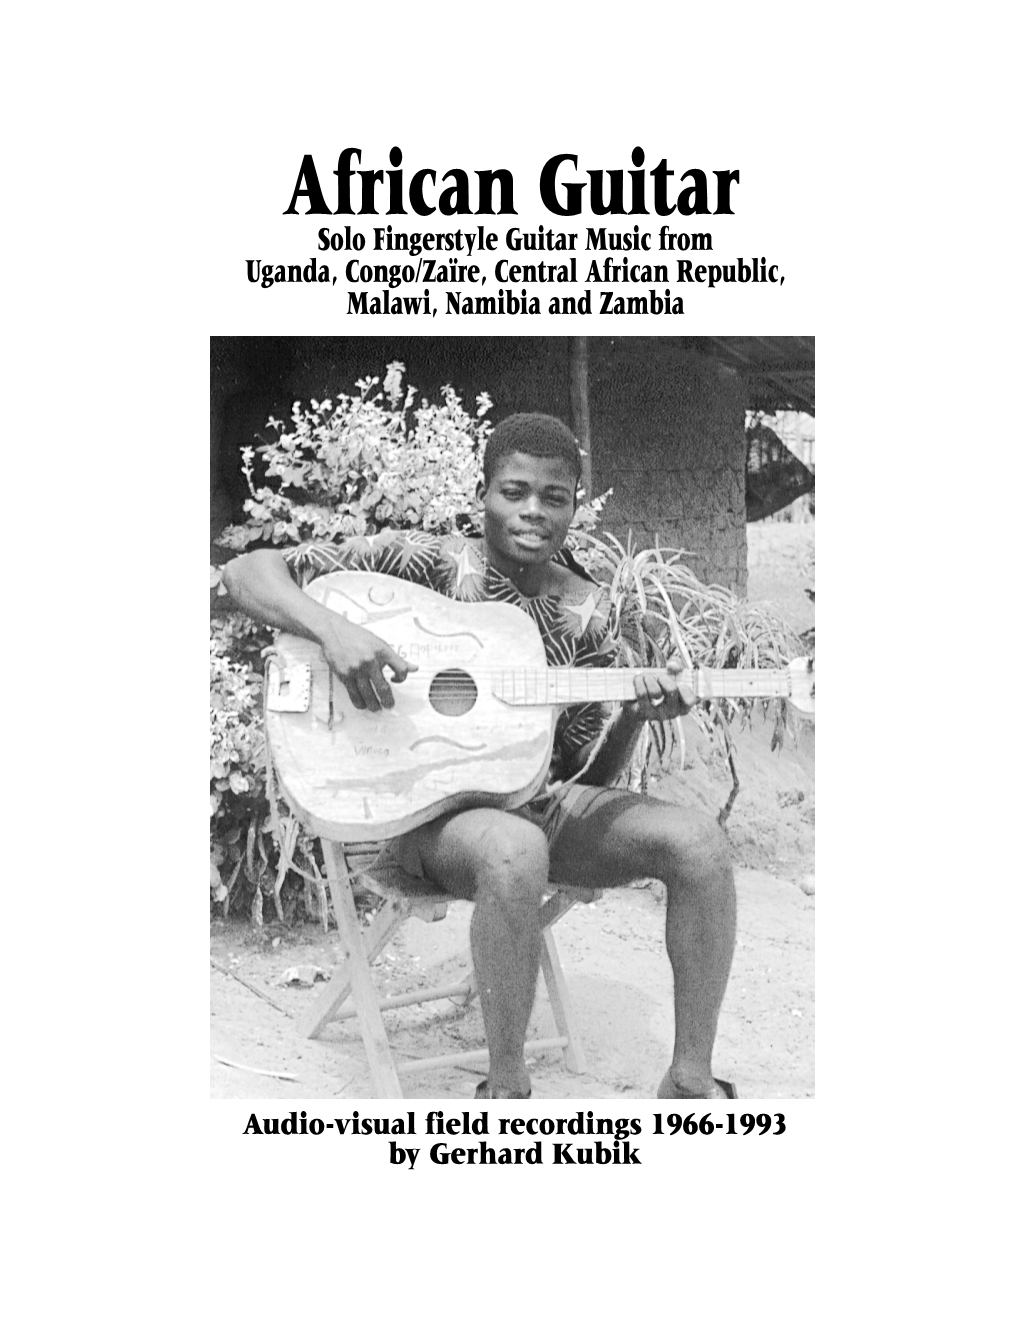 African Guitar Music, Although Commercially Available on 78 R.P.M